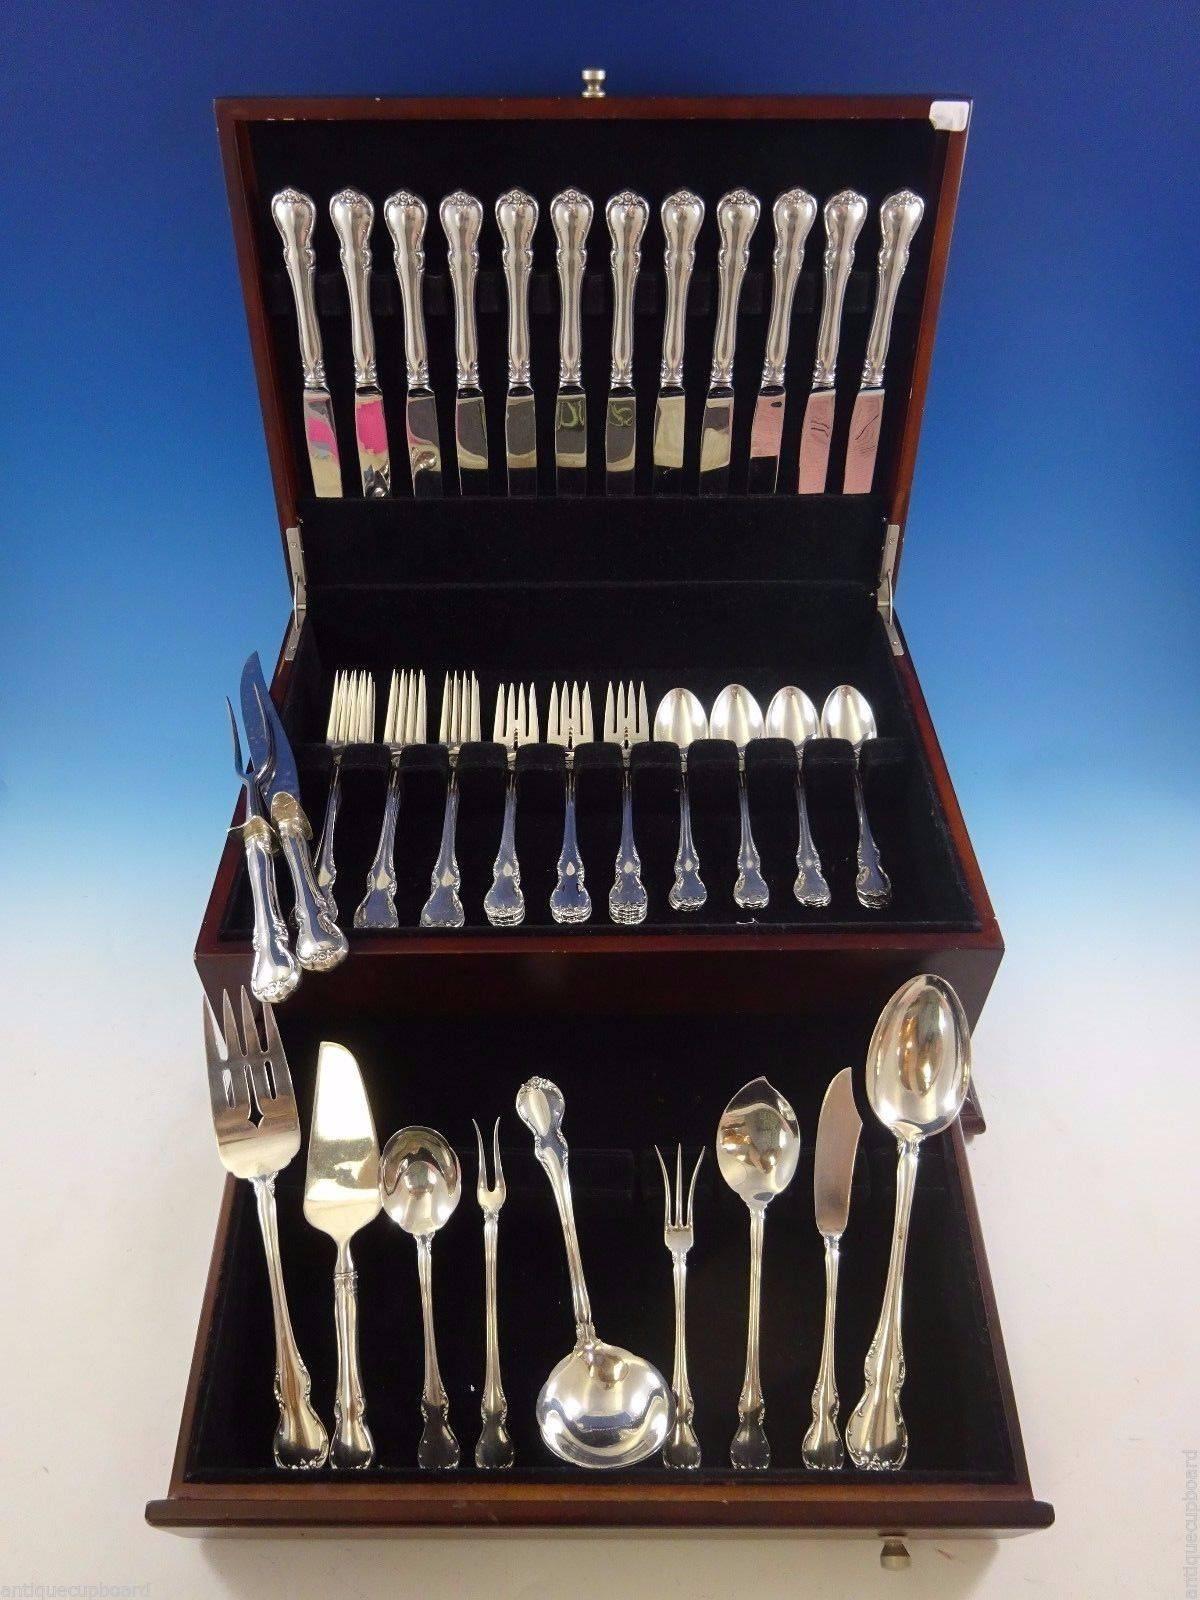 French Provincial by Towle sterling silver flatware set, 59 pieces. This set includes: 

12 knives, 8 7/8